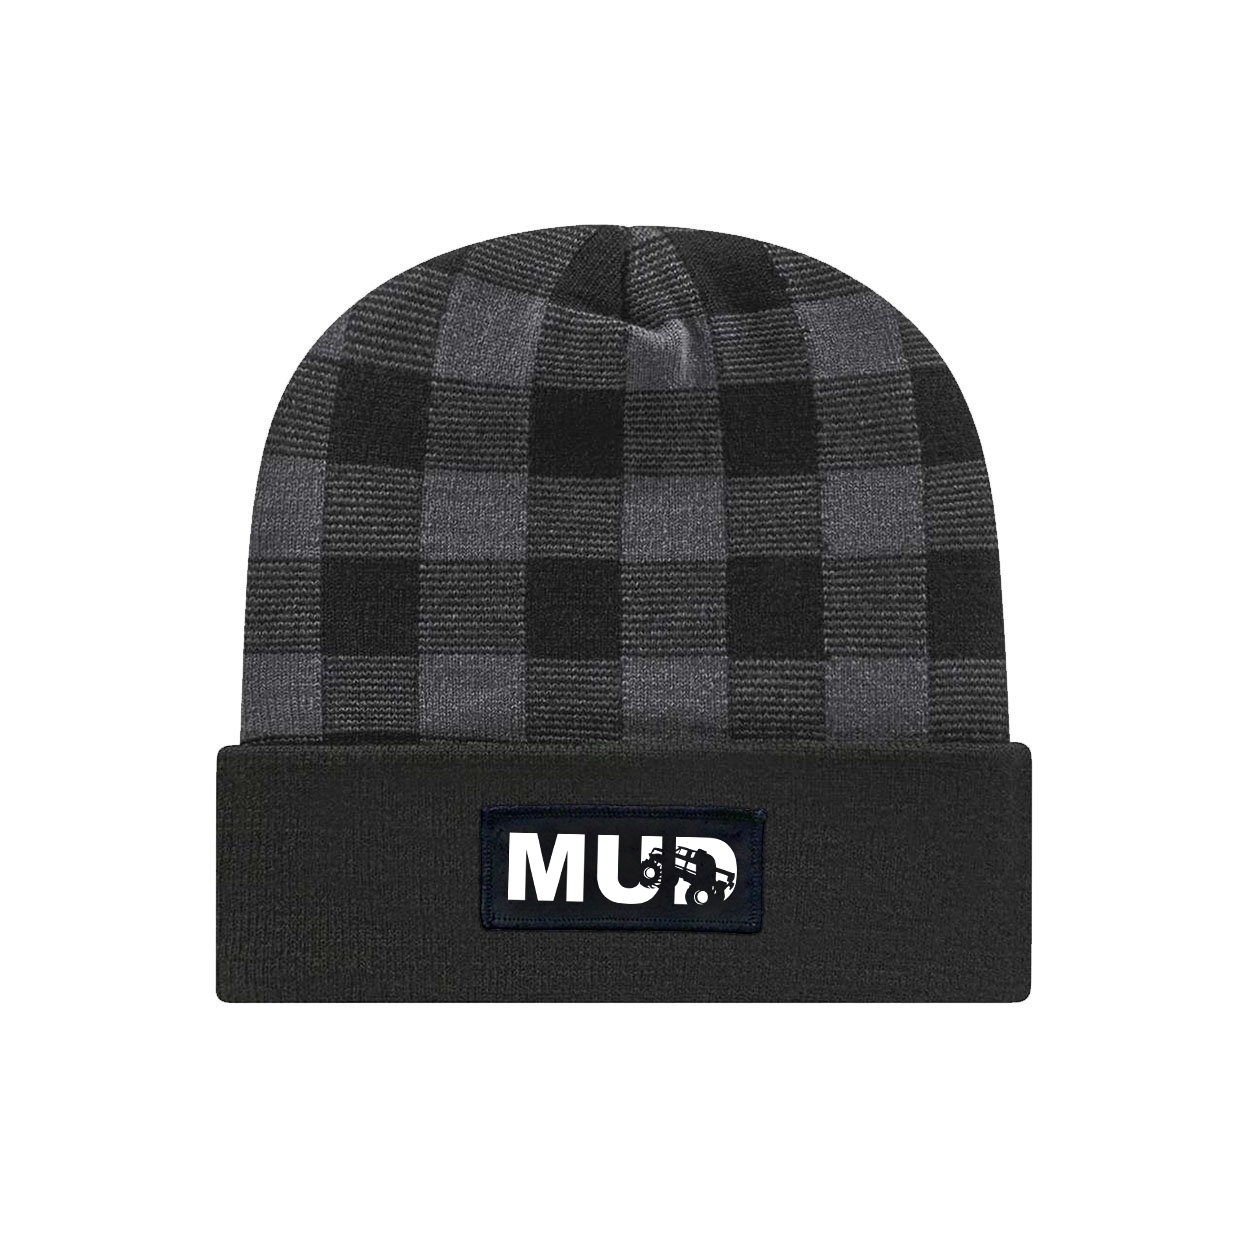 Mud Truck Logo Night Out Woven Patch Roll Up Plaid Beanie Black/Heather Gray (White Logo)